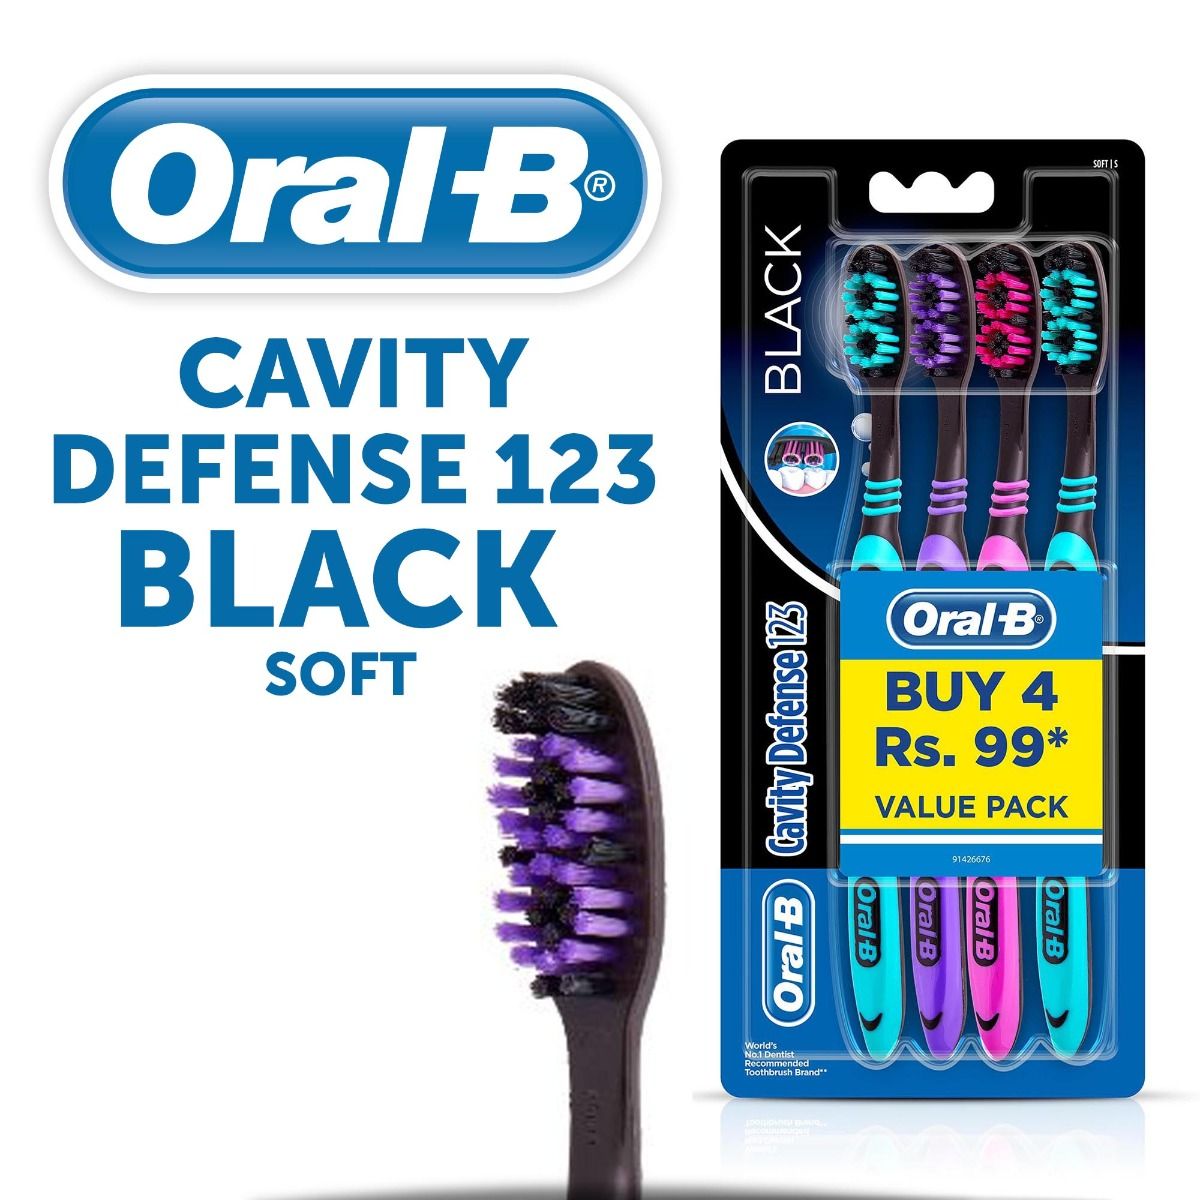 Buy Oral-B Cavity Defense 123 Black Soft Toothbrush, 4 Count (Buy 4 @ Rs.99) Online